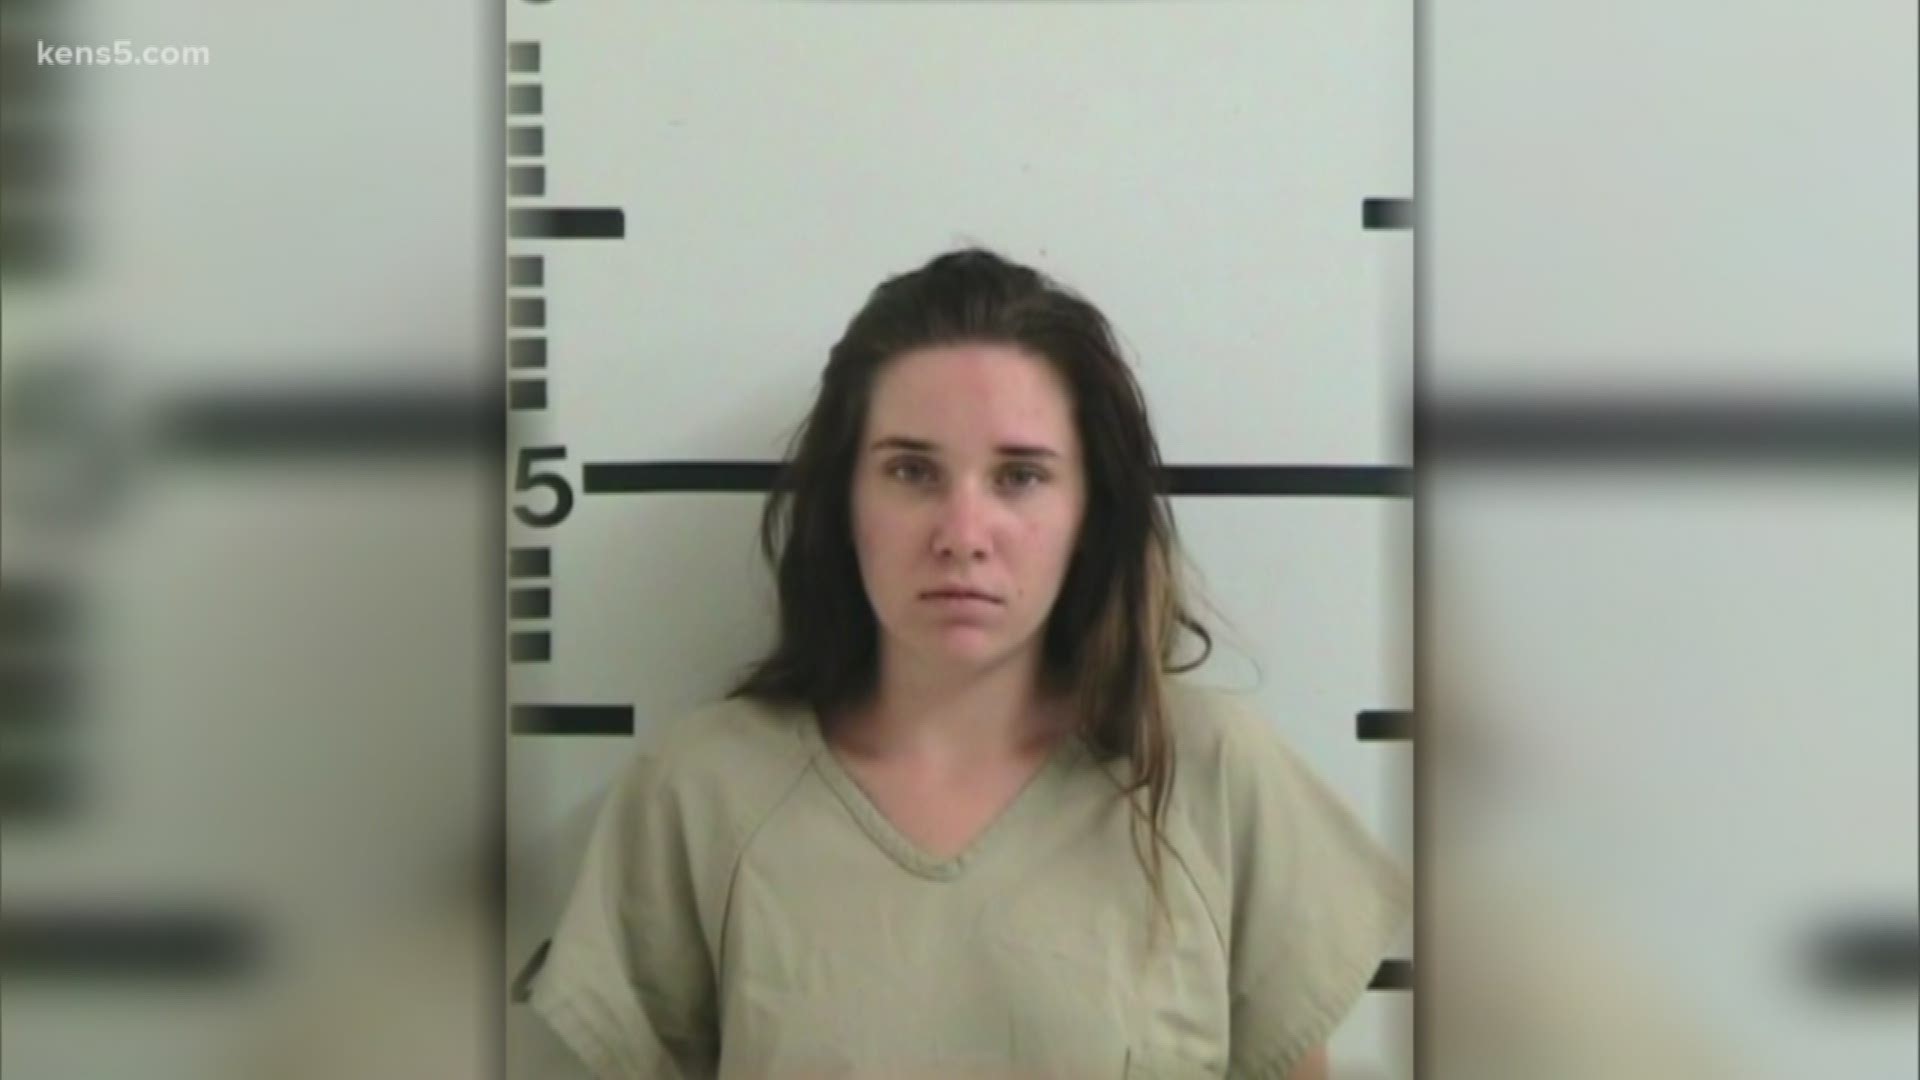 Investigators determined that Amanda Hawkins had left her two children in her car for more than 15 hours while "she and other friends were inside a residence."